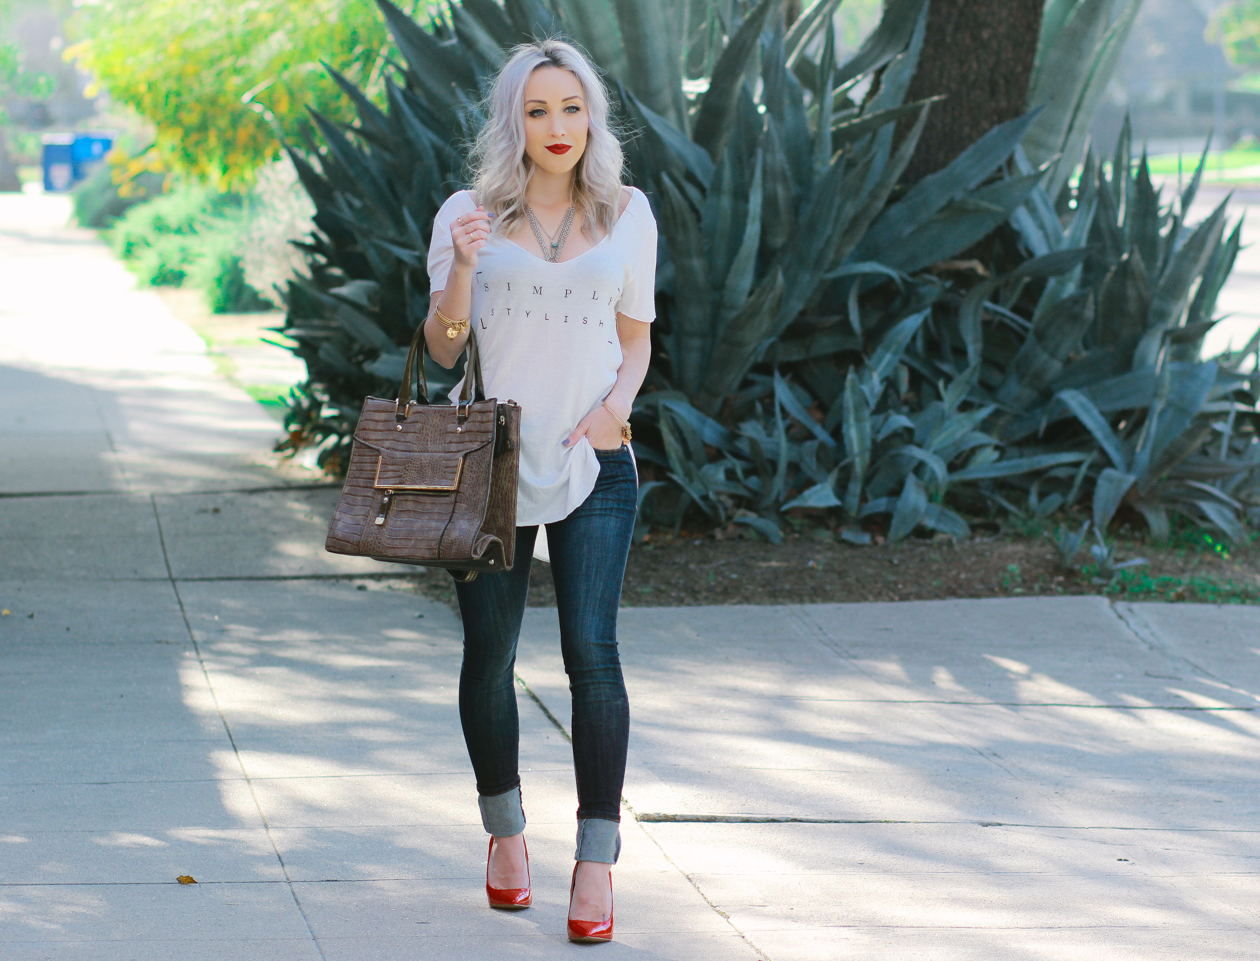 Simply Stylish with @anglclothing | Casual Style with Red Heels | BlondieintheCity.com